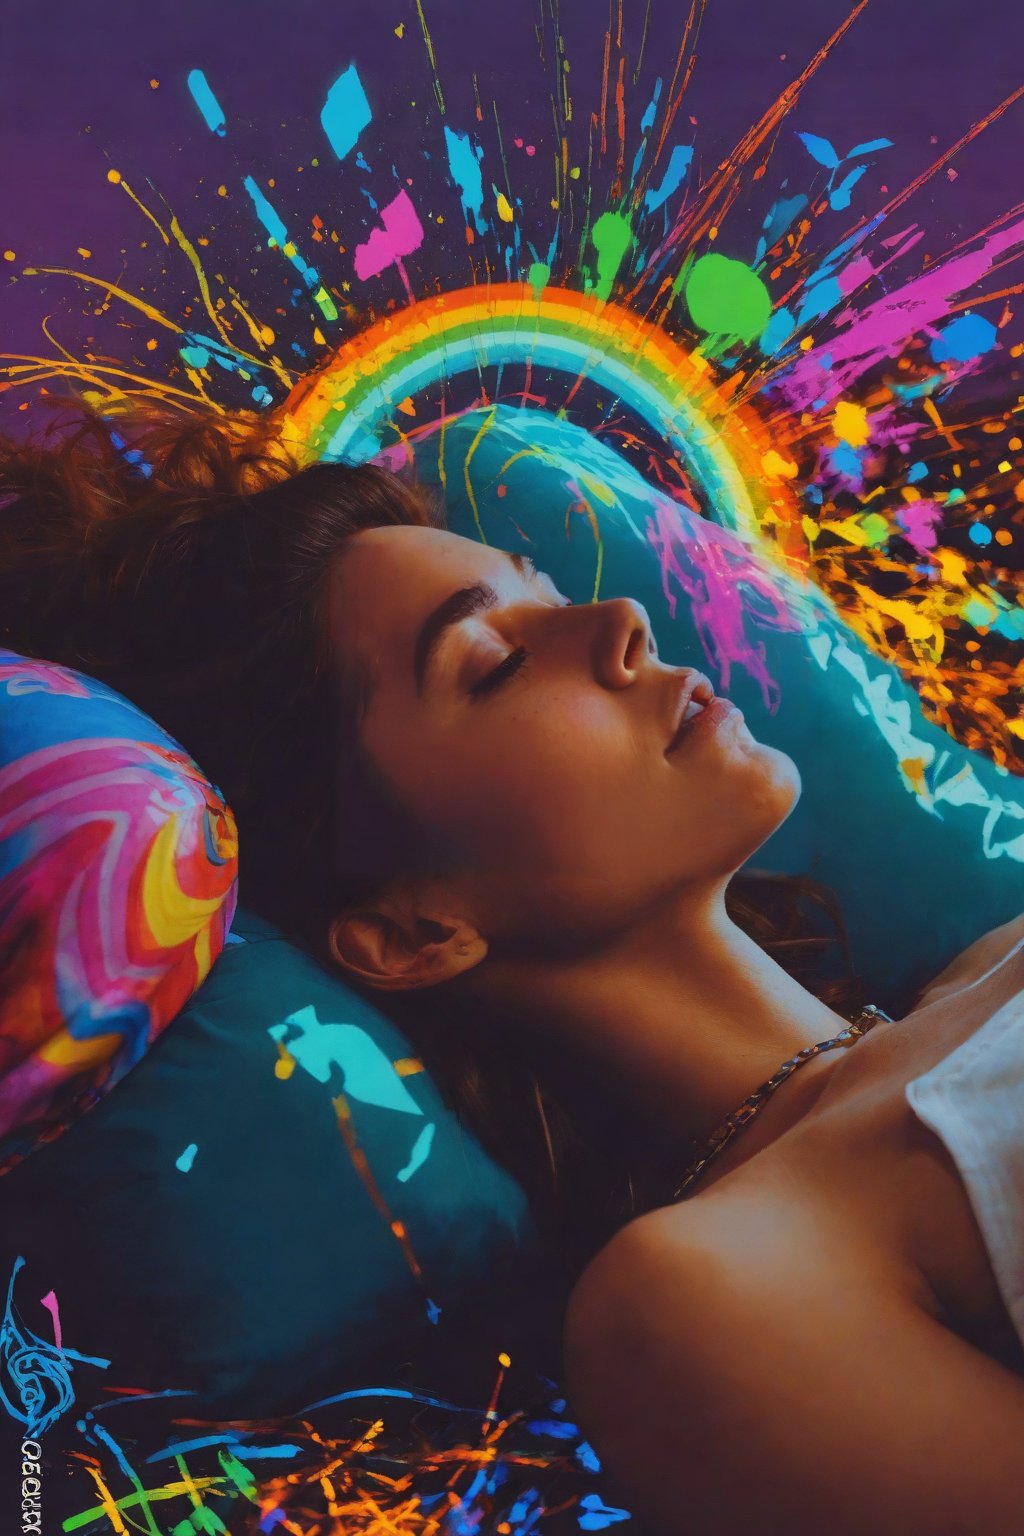 photograph, POV shot of 2000'S stout Cuban 1girl, surreal, sleeping pose, her hair is Rainbow and styled as Low fade, Bokeh, Zen, Cold Lighting, Slow Shutter Speed, Kodak Ektachrome E100, F/2.8, wallpaper, Best quality, designed by Tristan Eaton